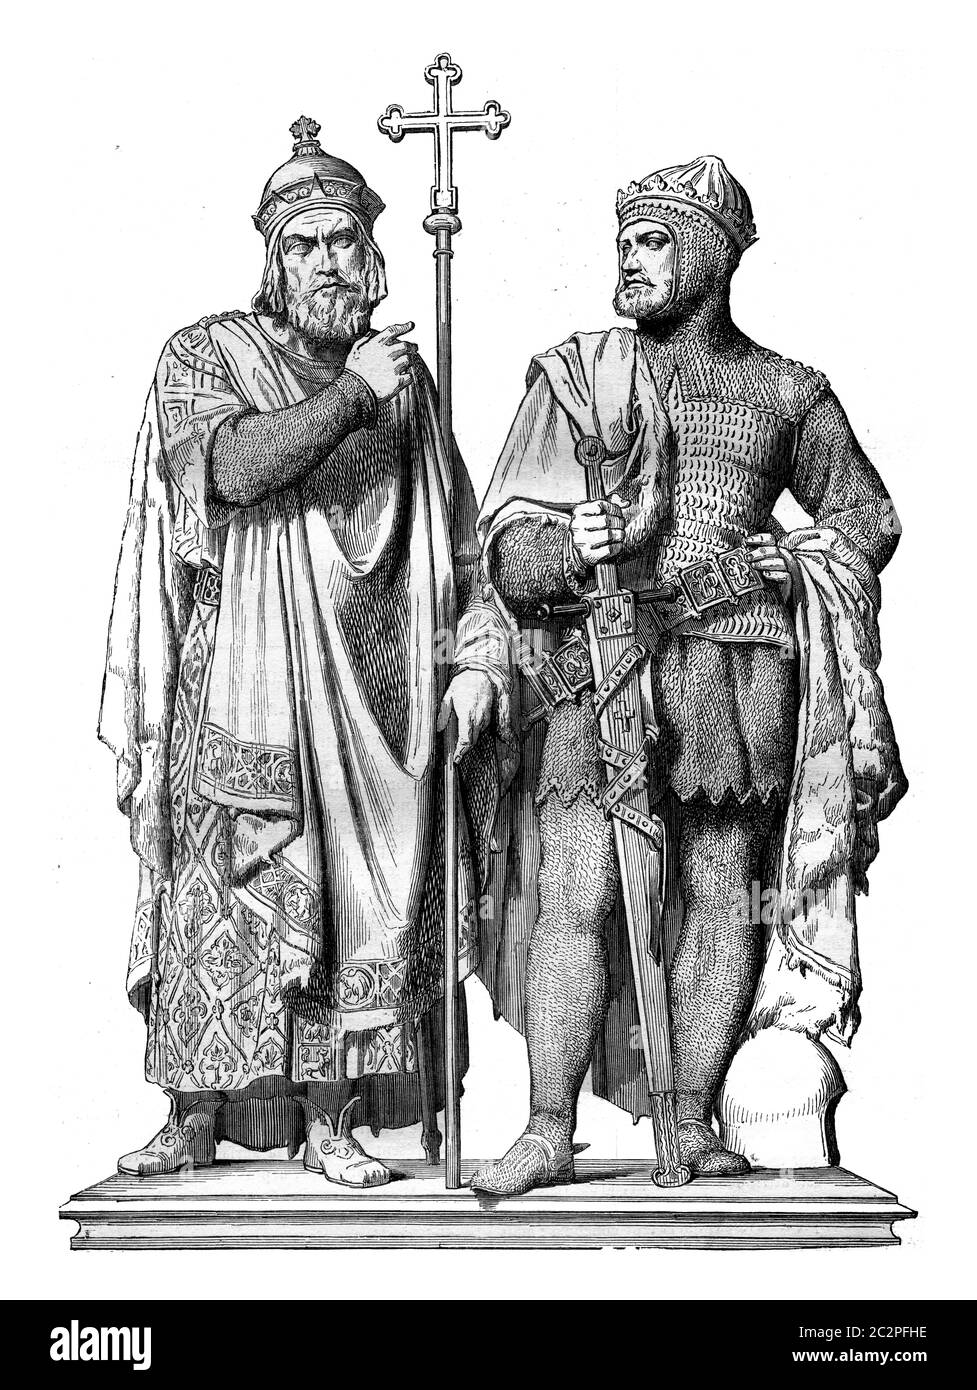 First Miecislas and Boleslaw the Great Bronze group by Rauch, in the Cathedral of Poznan, a city of the Prussian states, vintage engraved illustration Stock Photo